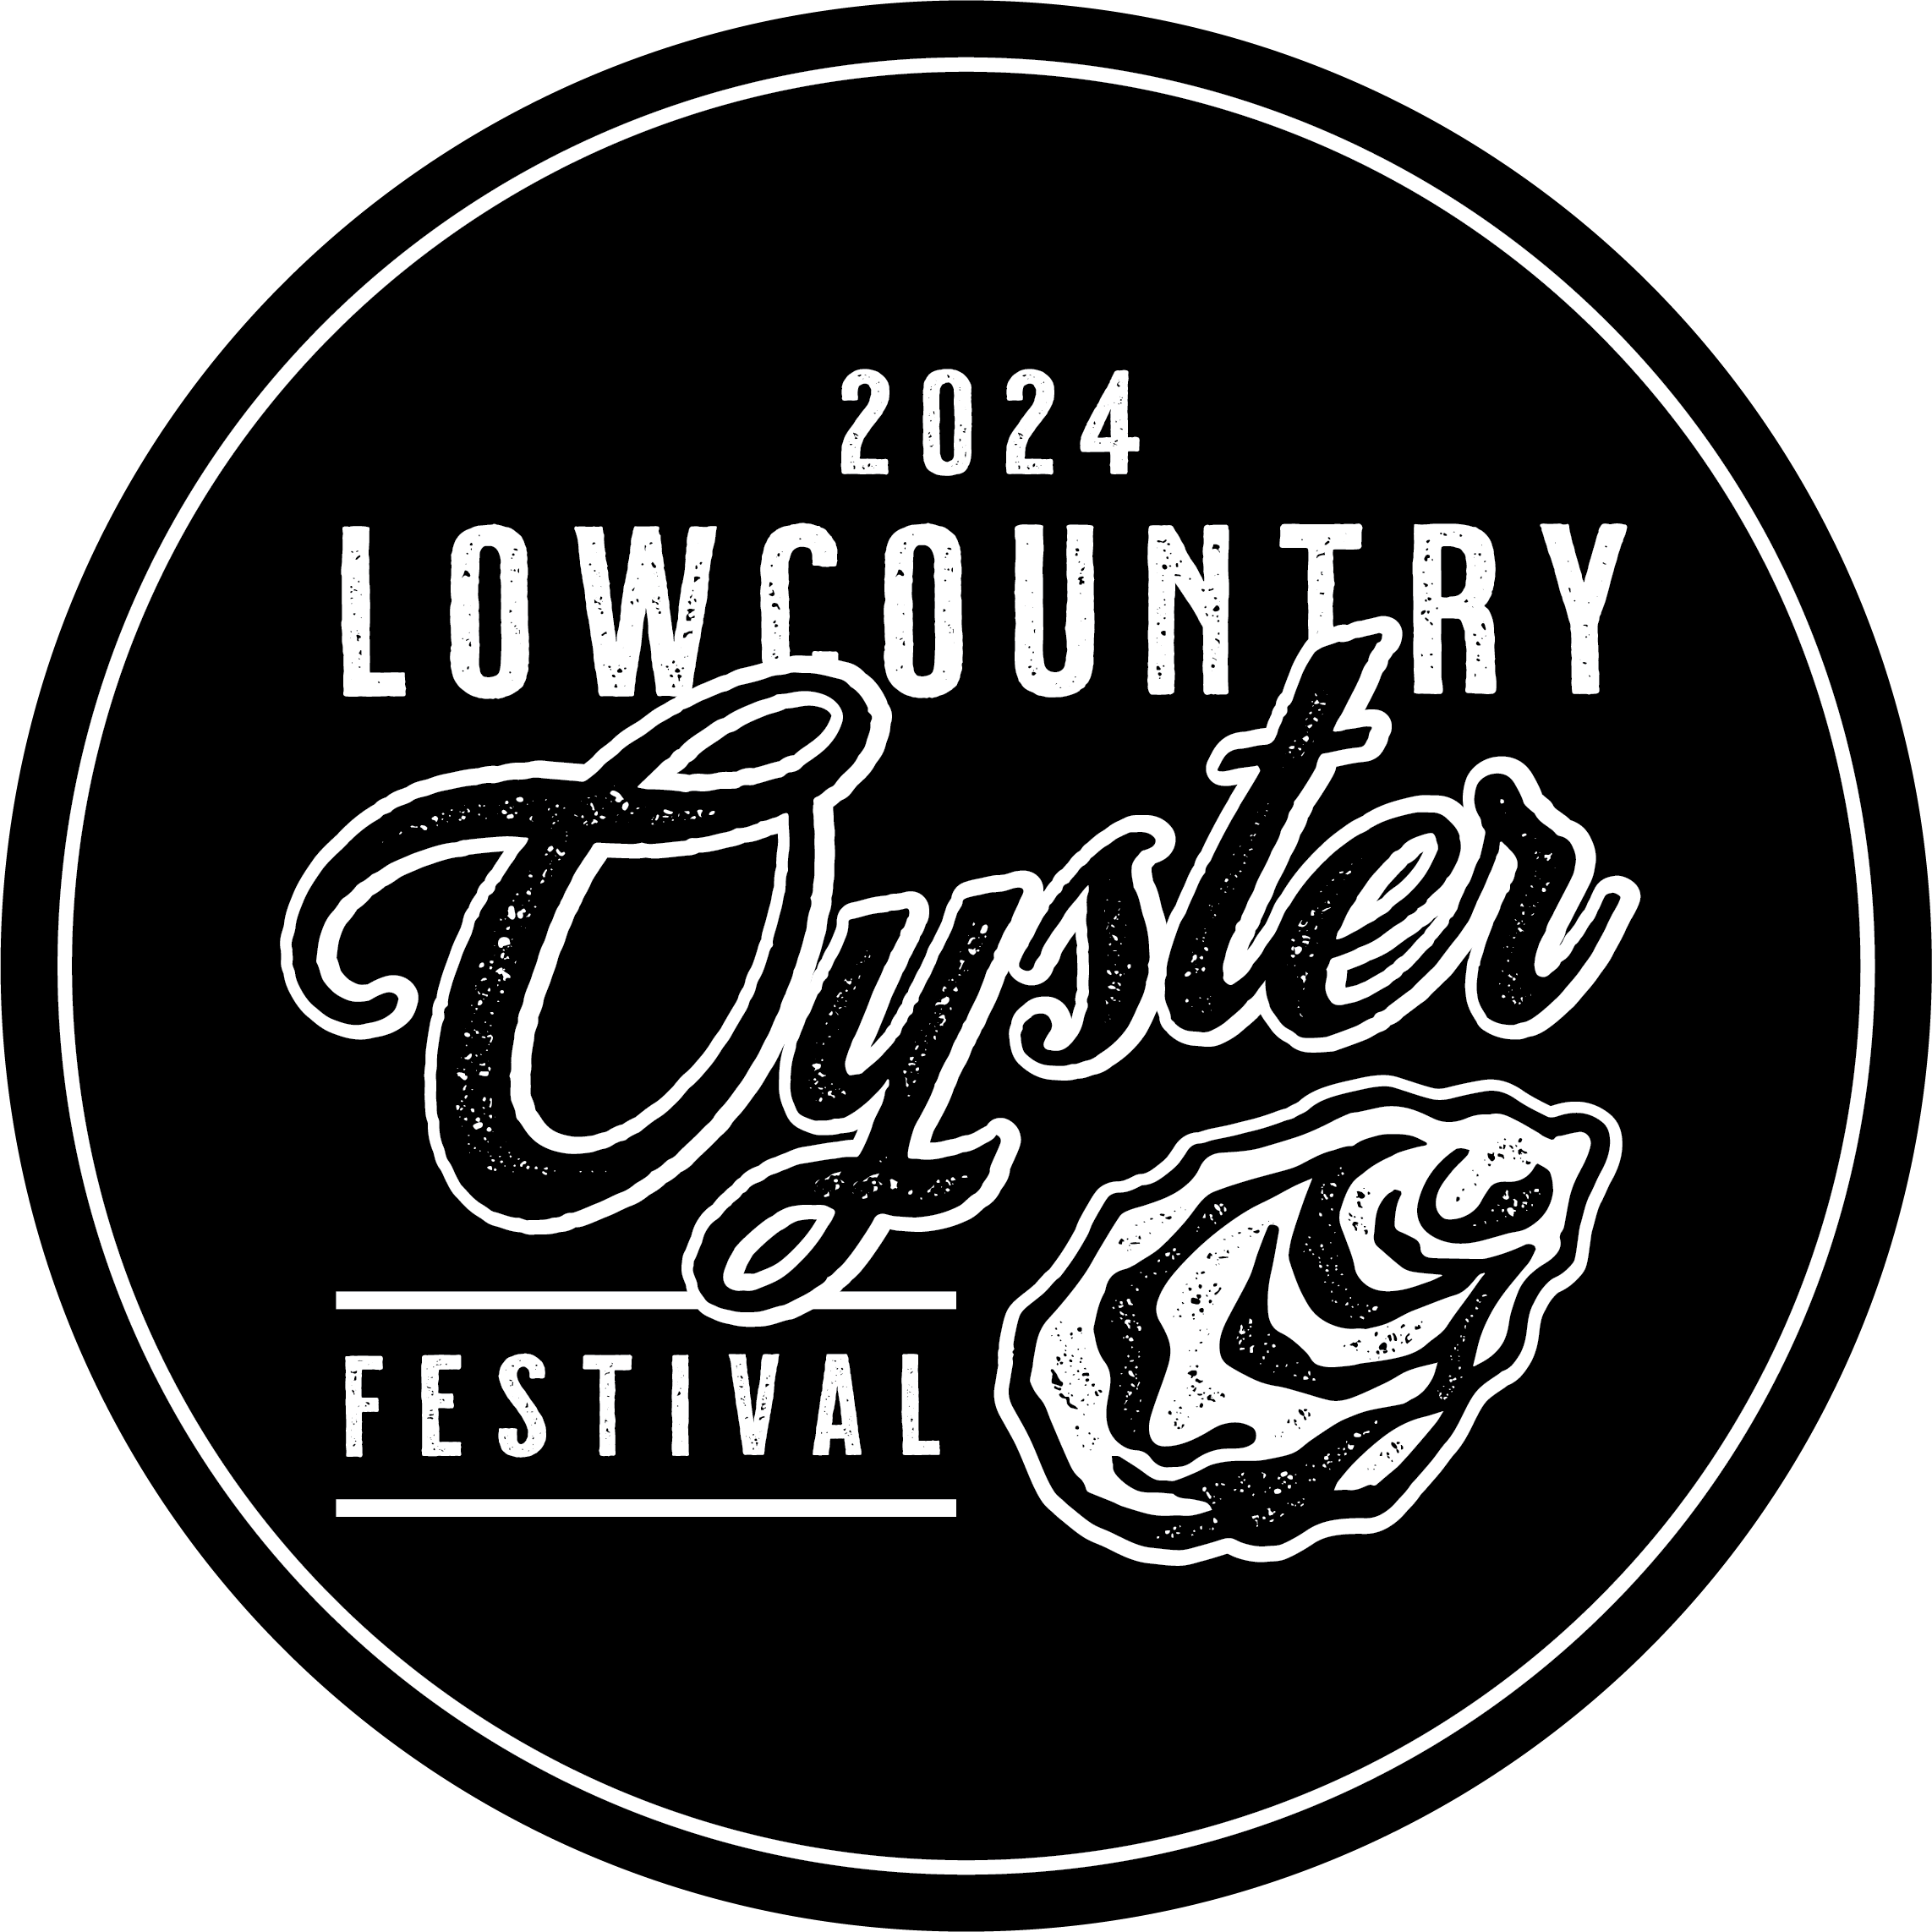 2024 Lowcountry Oyster Festival